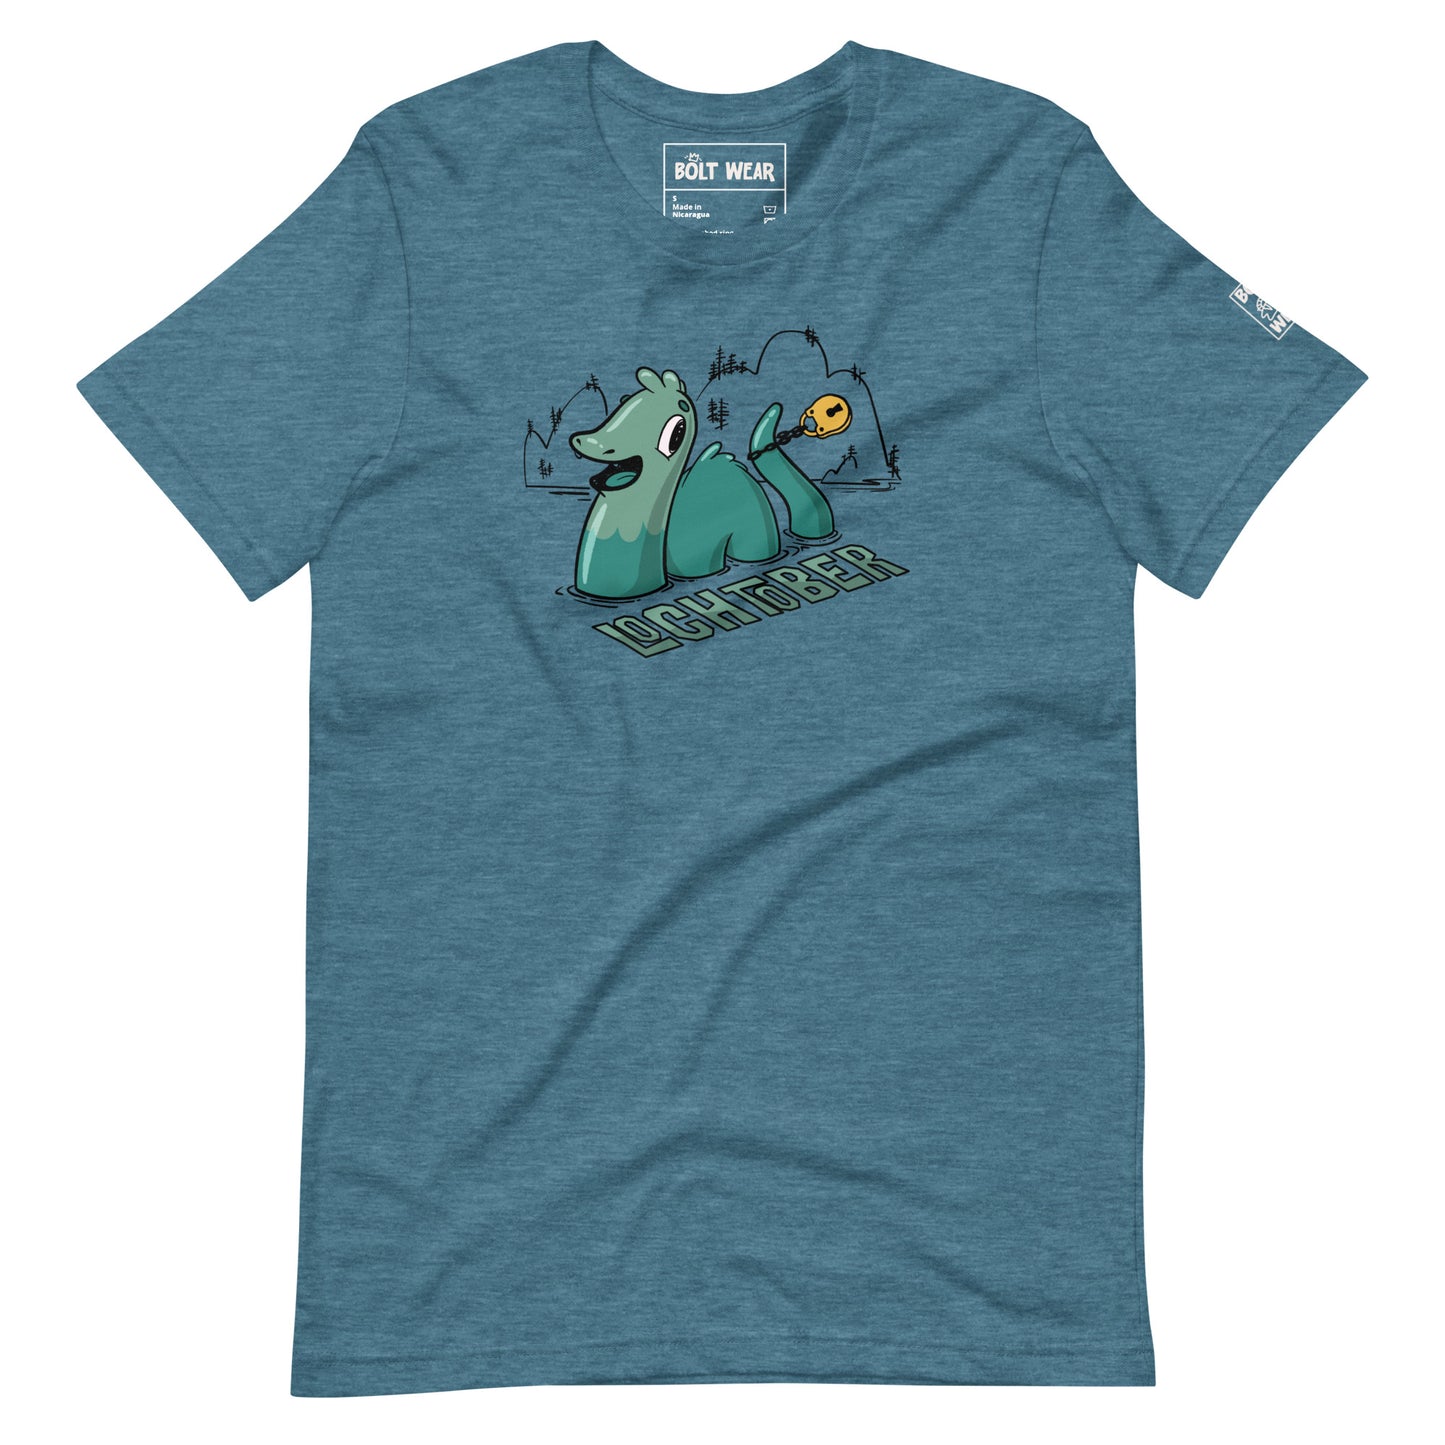 Heather deep teal Lochtober shirt featuring lochness monster and lock around tail.